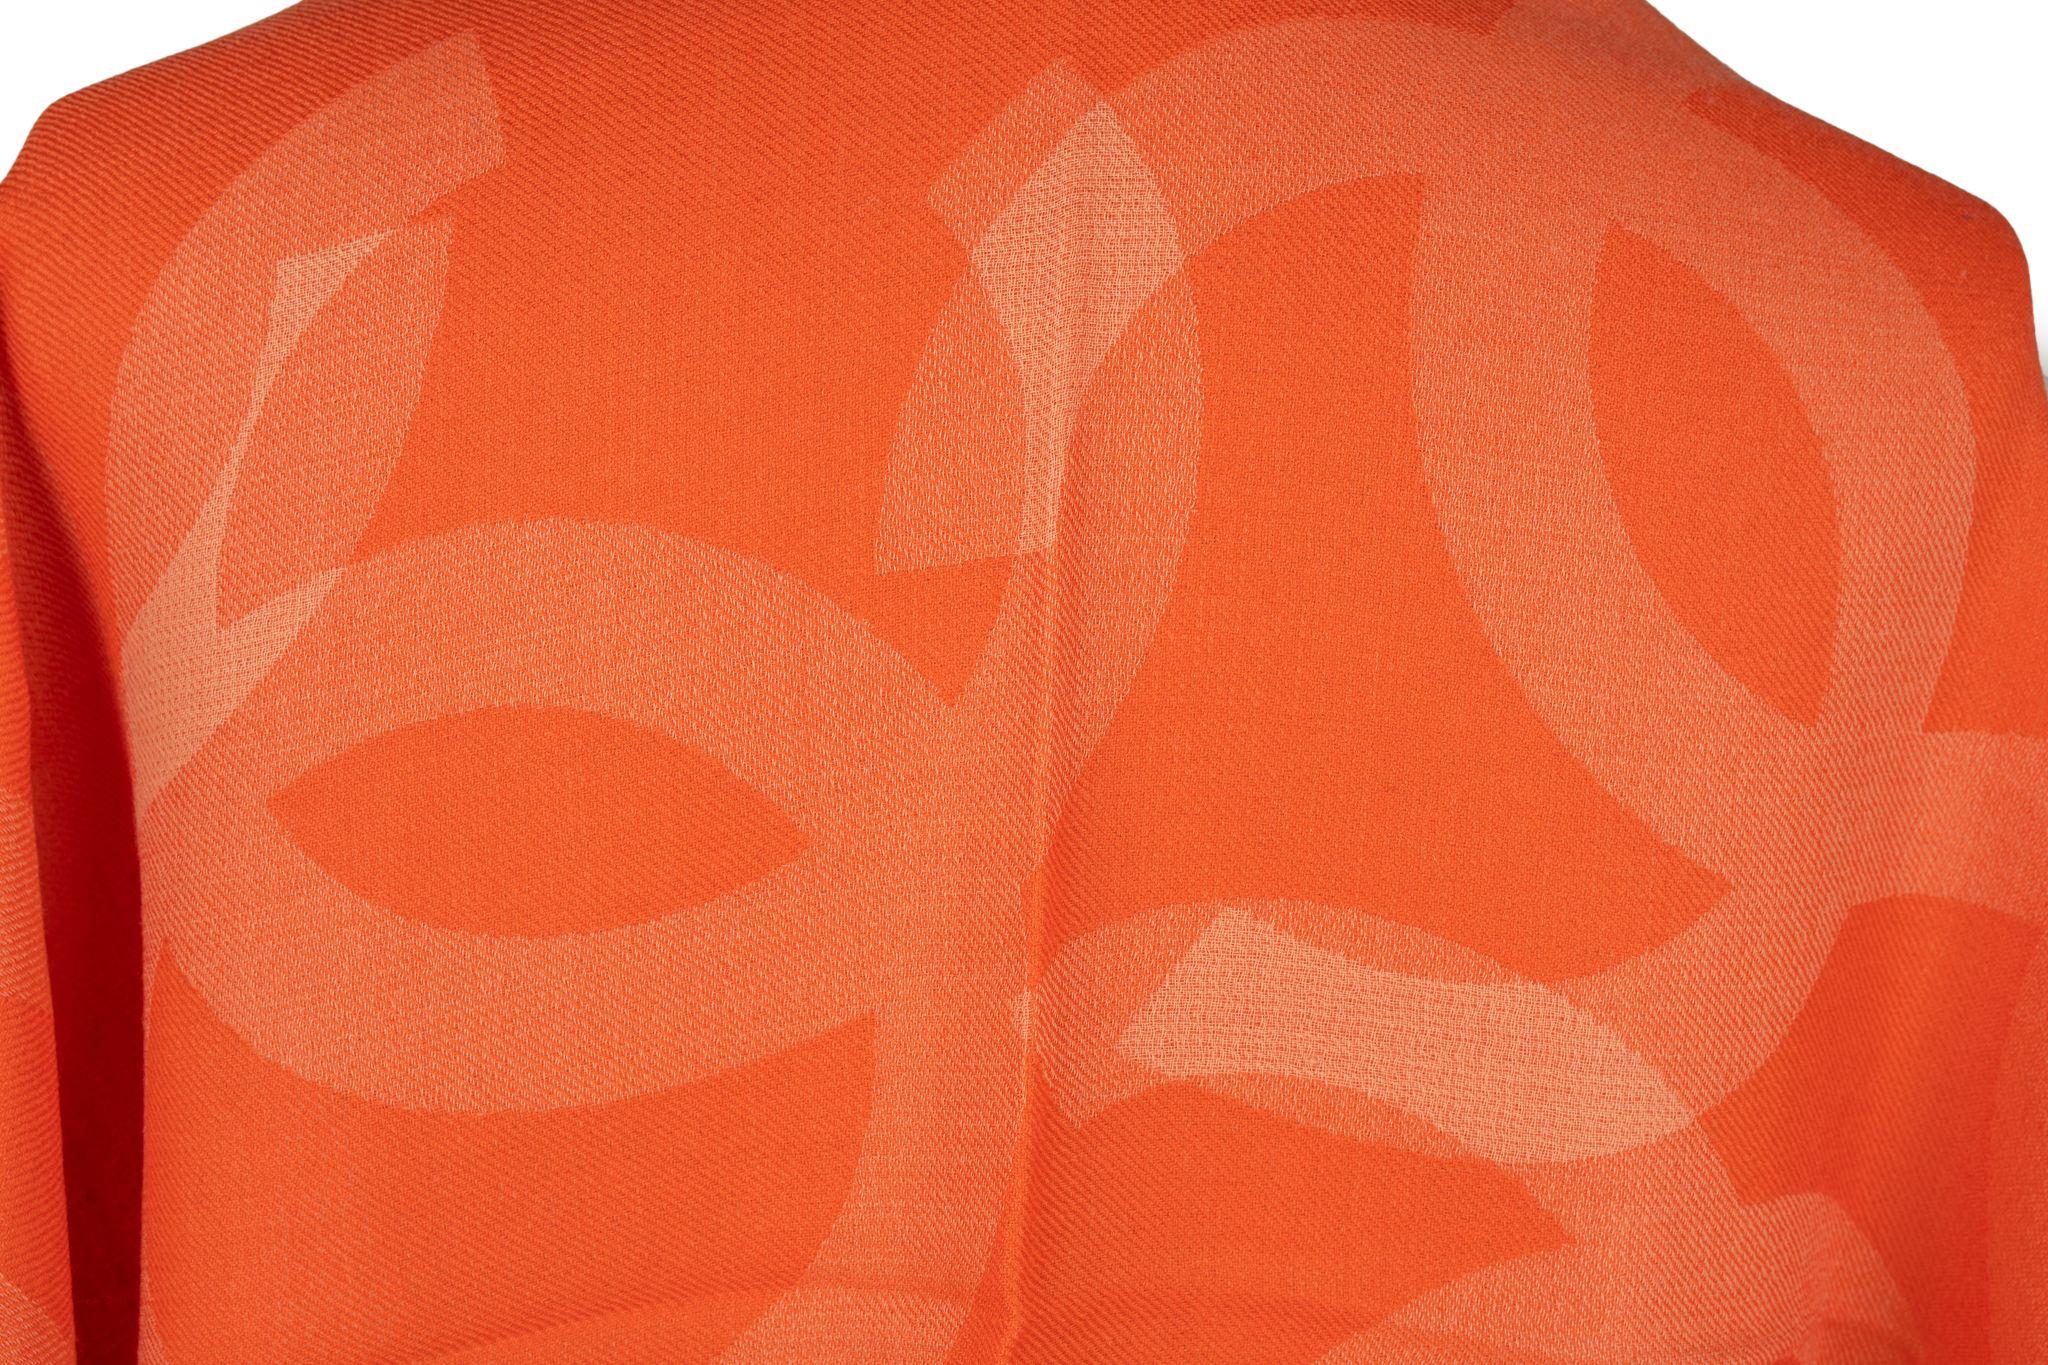 Chanel Cashmere Shawl Orange. The pattern features big overlapping CC logos. The item is in new condition.